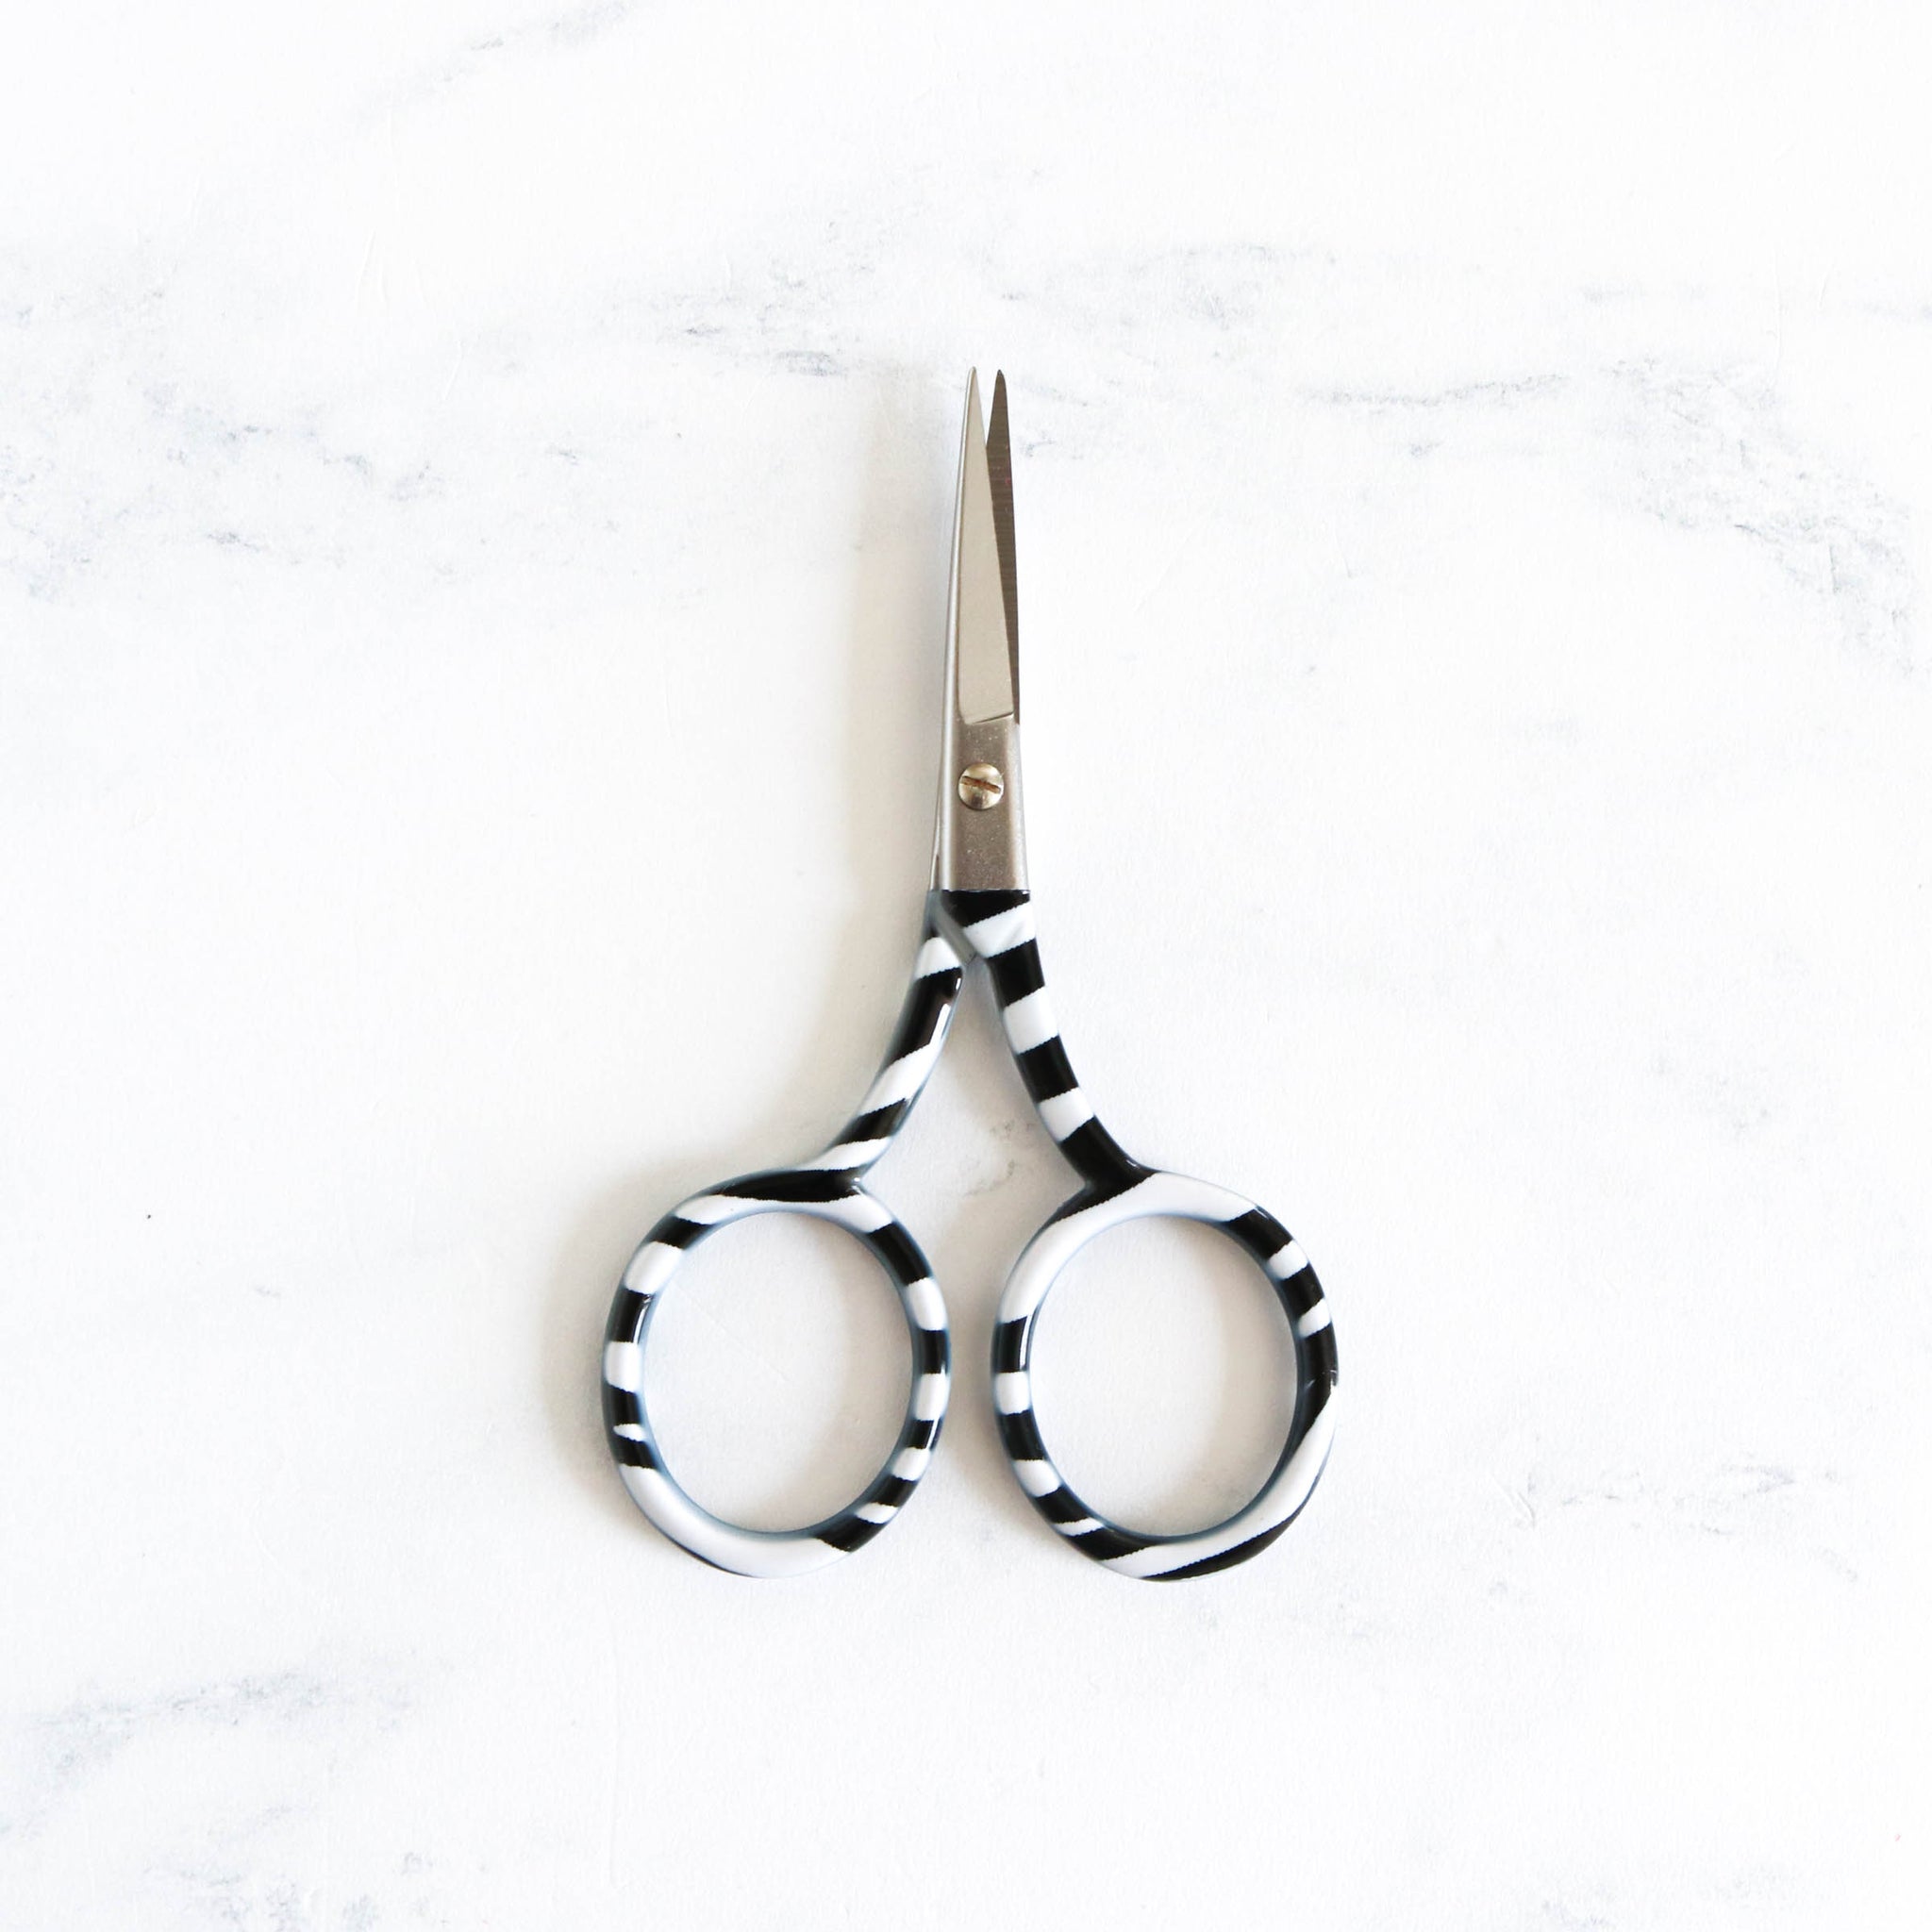 3 3/4 Black and White Zebra Print Embroidery Scissors Stainless Steel Cross  Stitch Needlepoint Small Sewing Sharp Needlework Crafts 